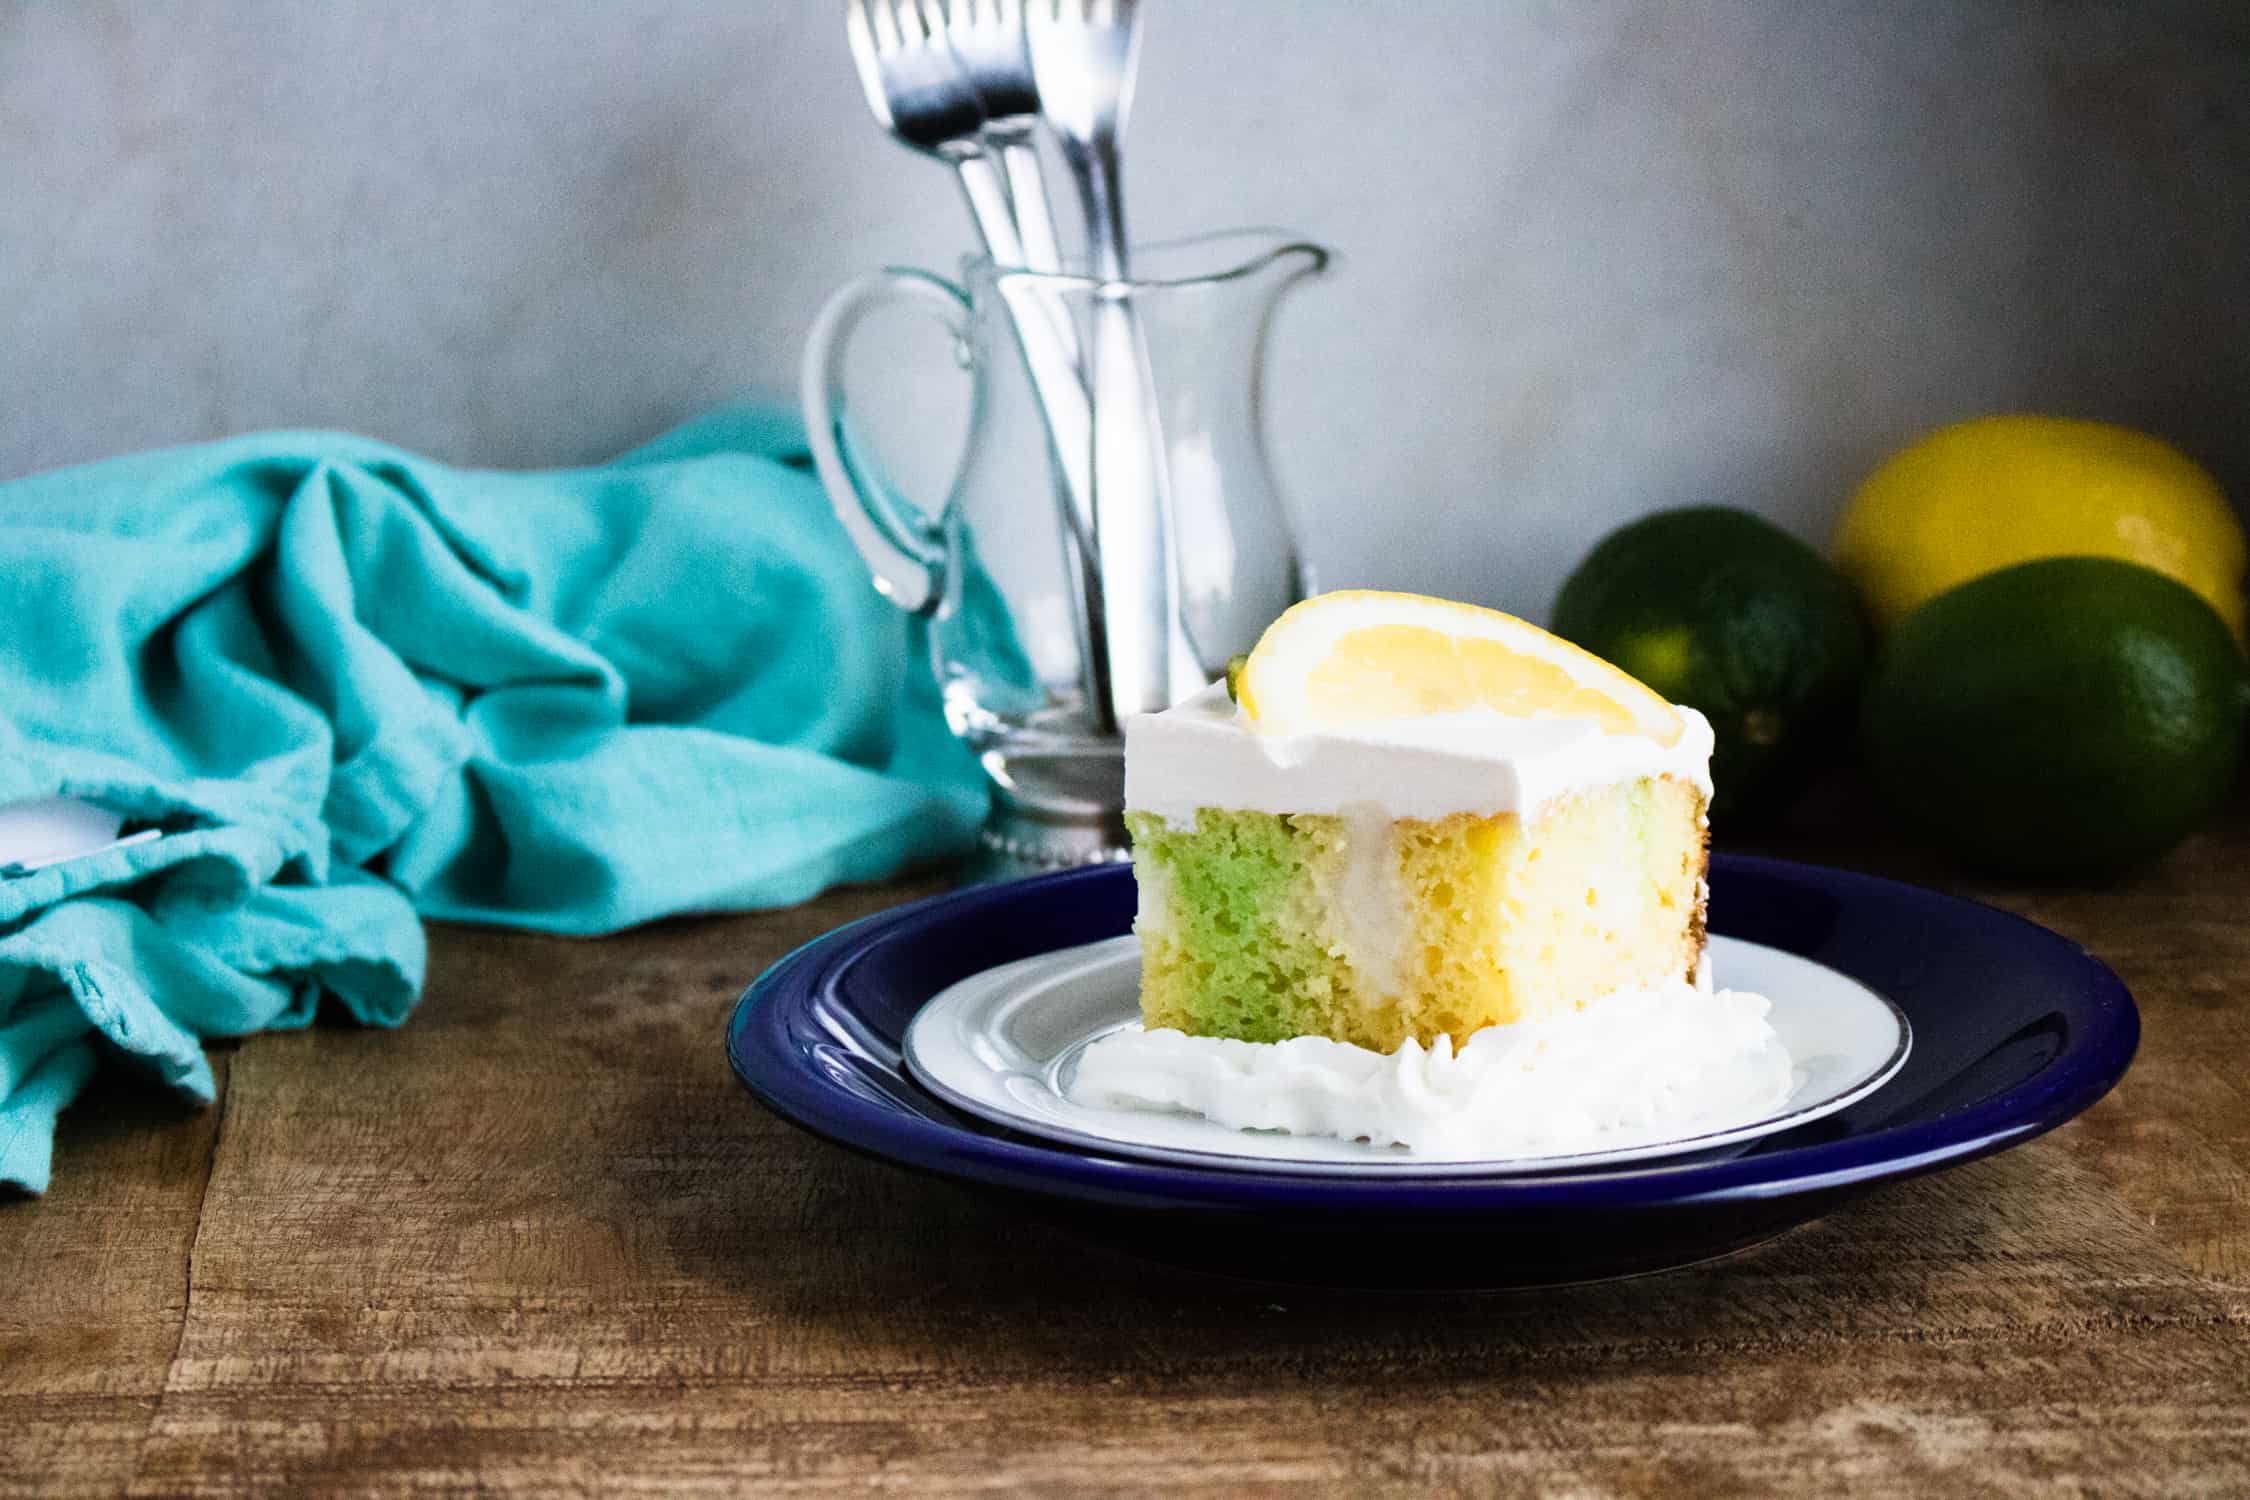 a slice of Lemon Lime Poke Cake on a white saucer on top of a blue plate with a teal kitchen towel, lemons and limes and utensils in a glass pitcher in the background